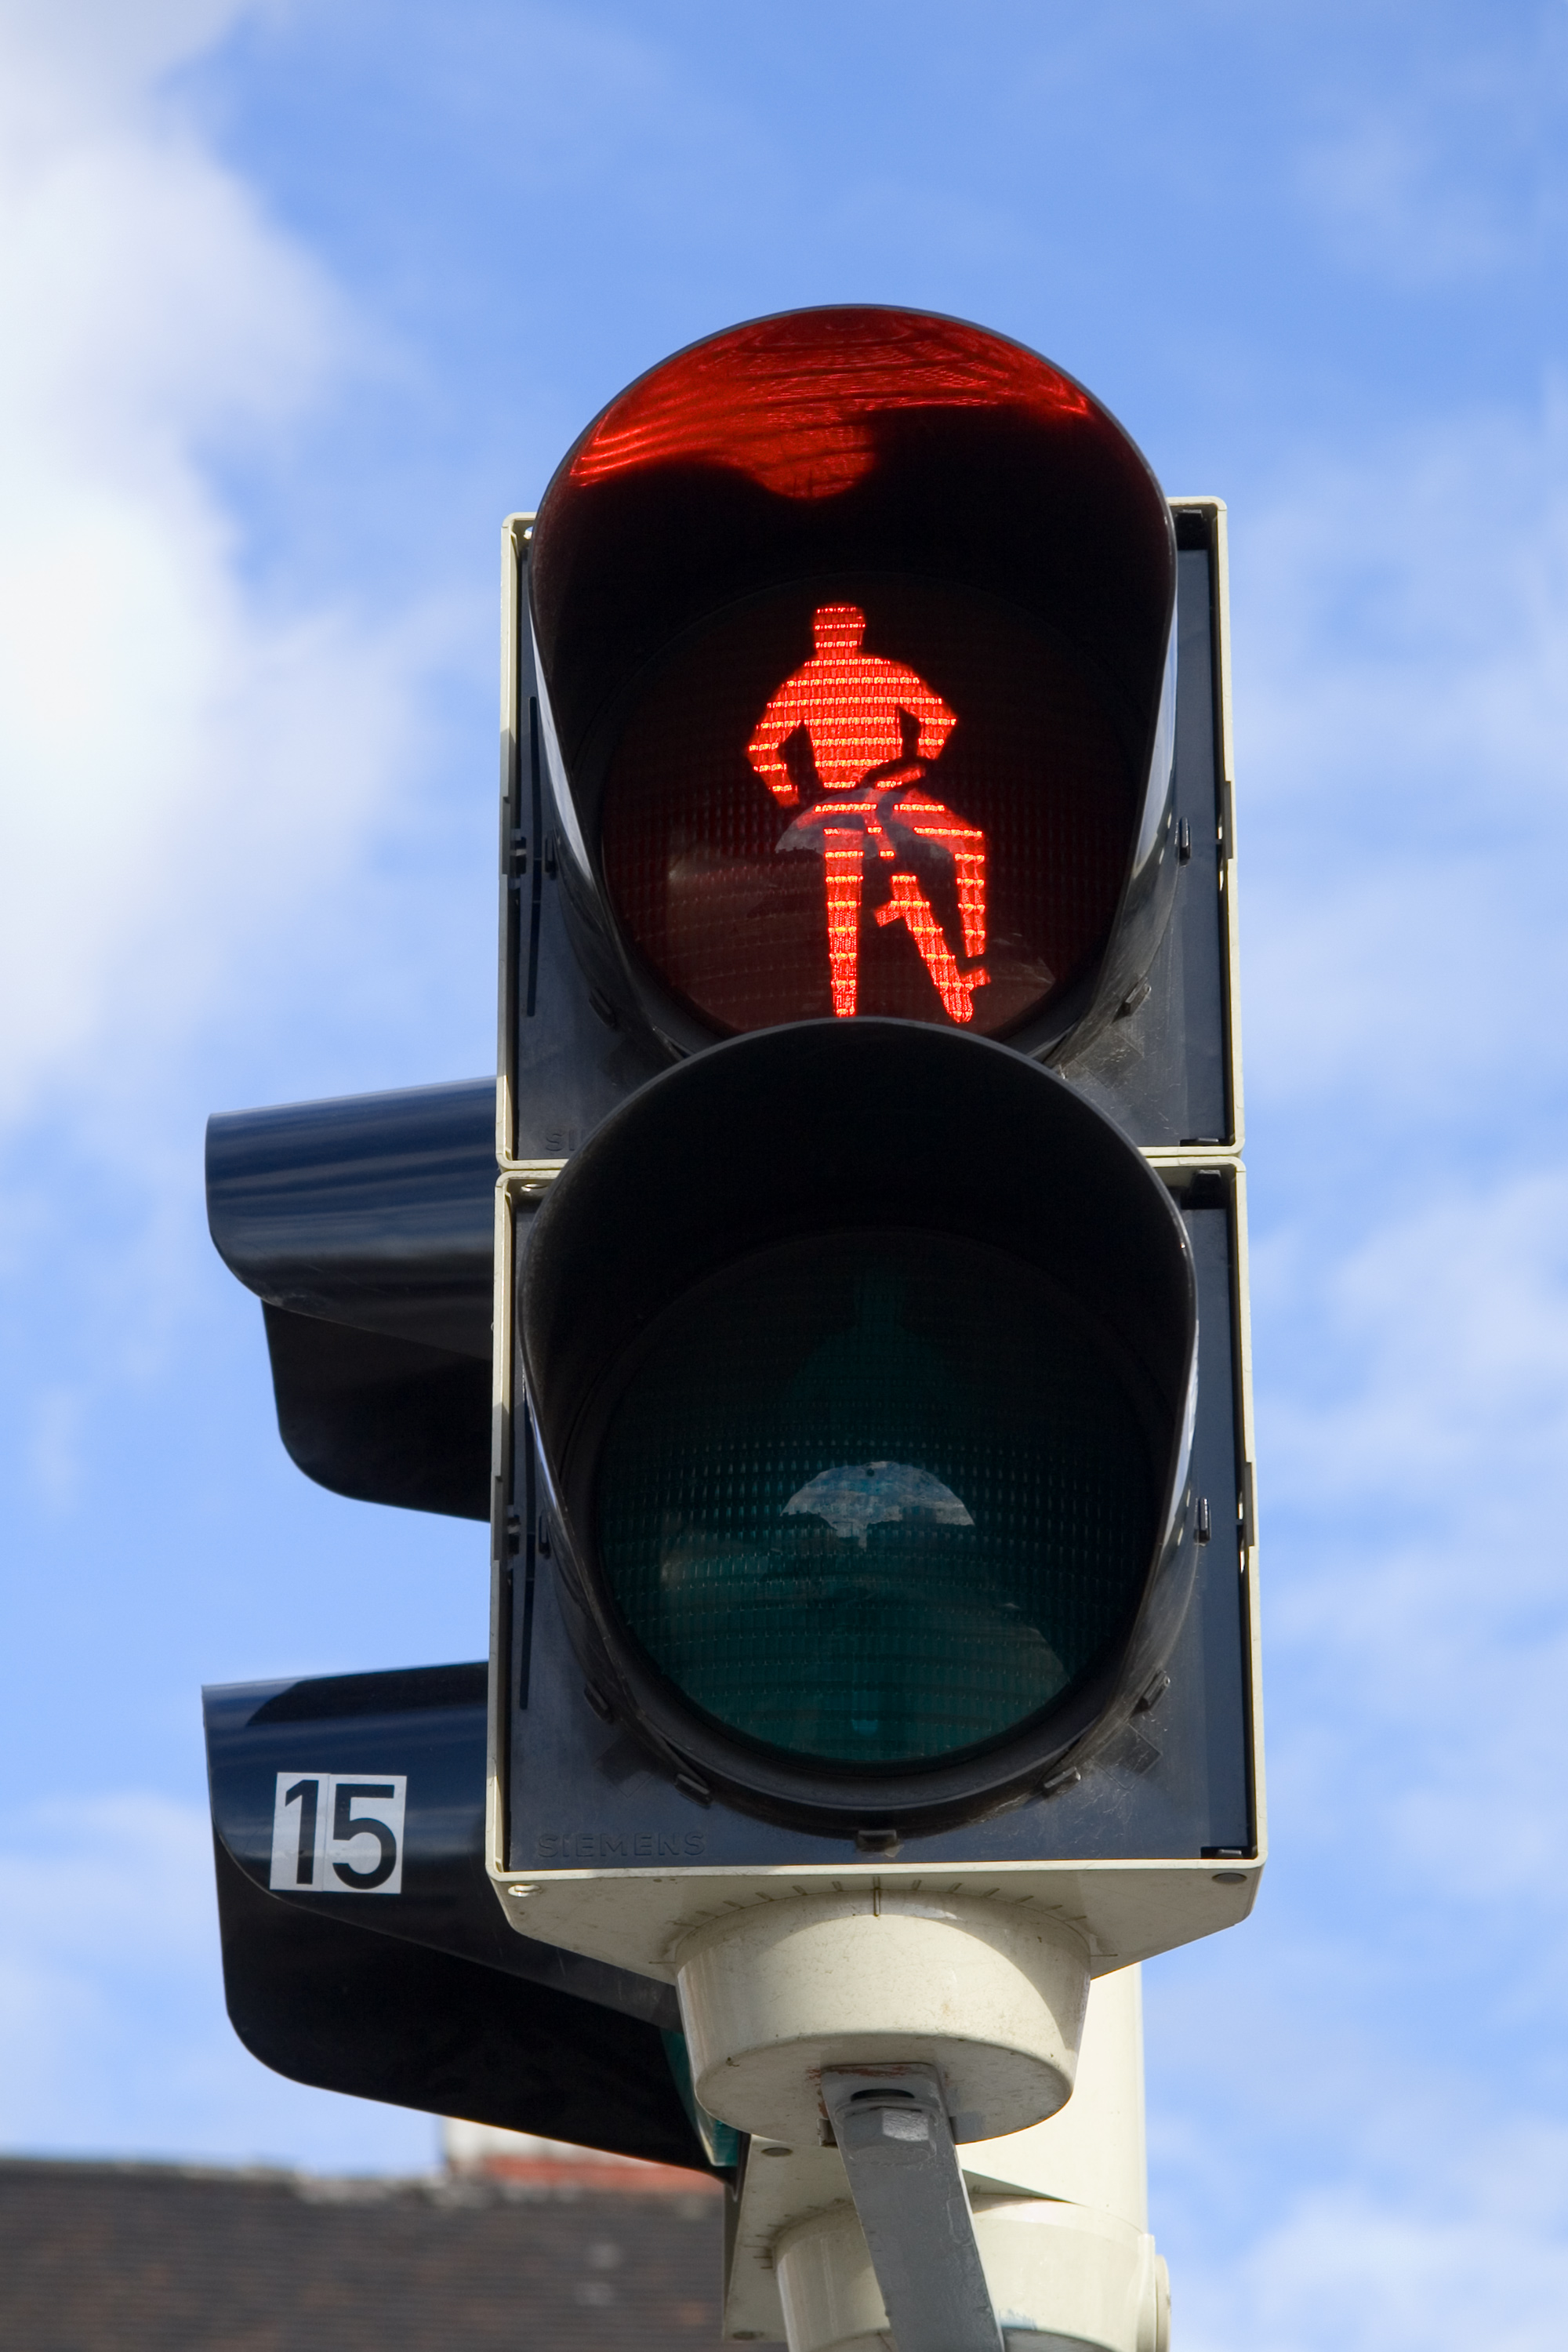 Traffic light for cyclists - red light